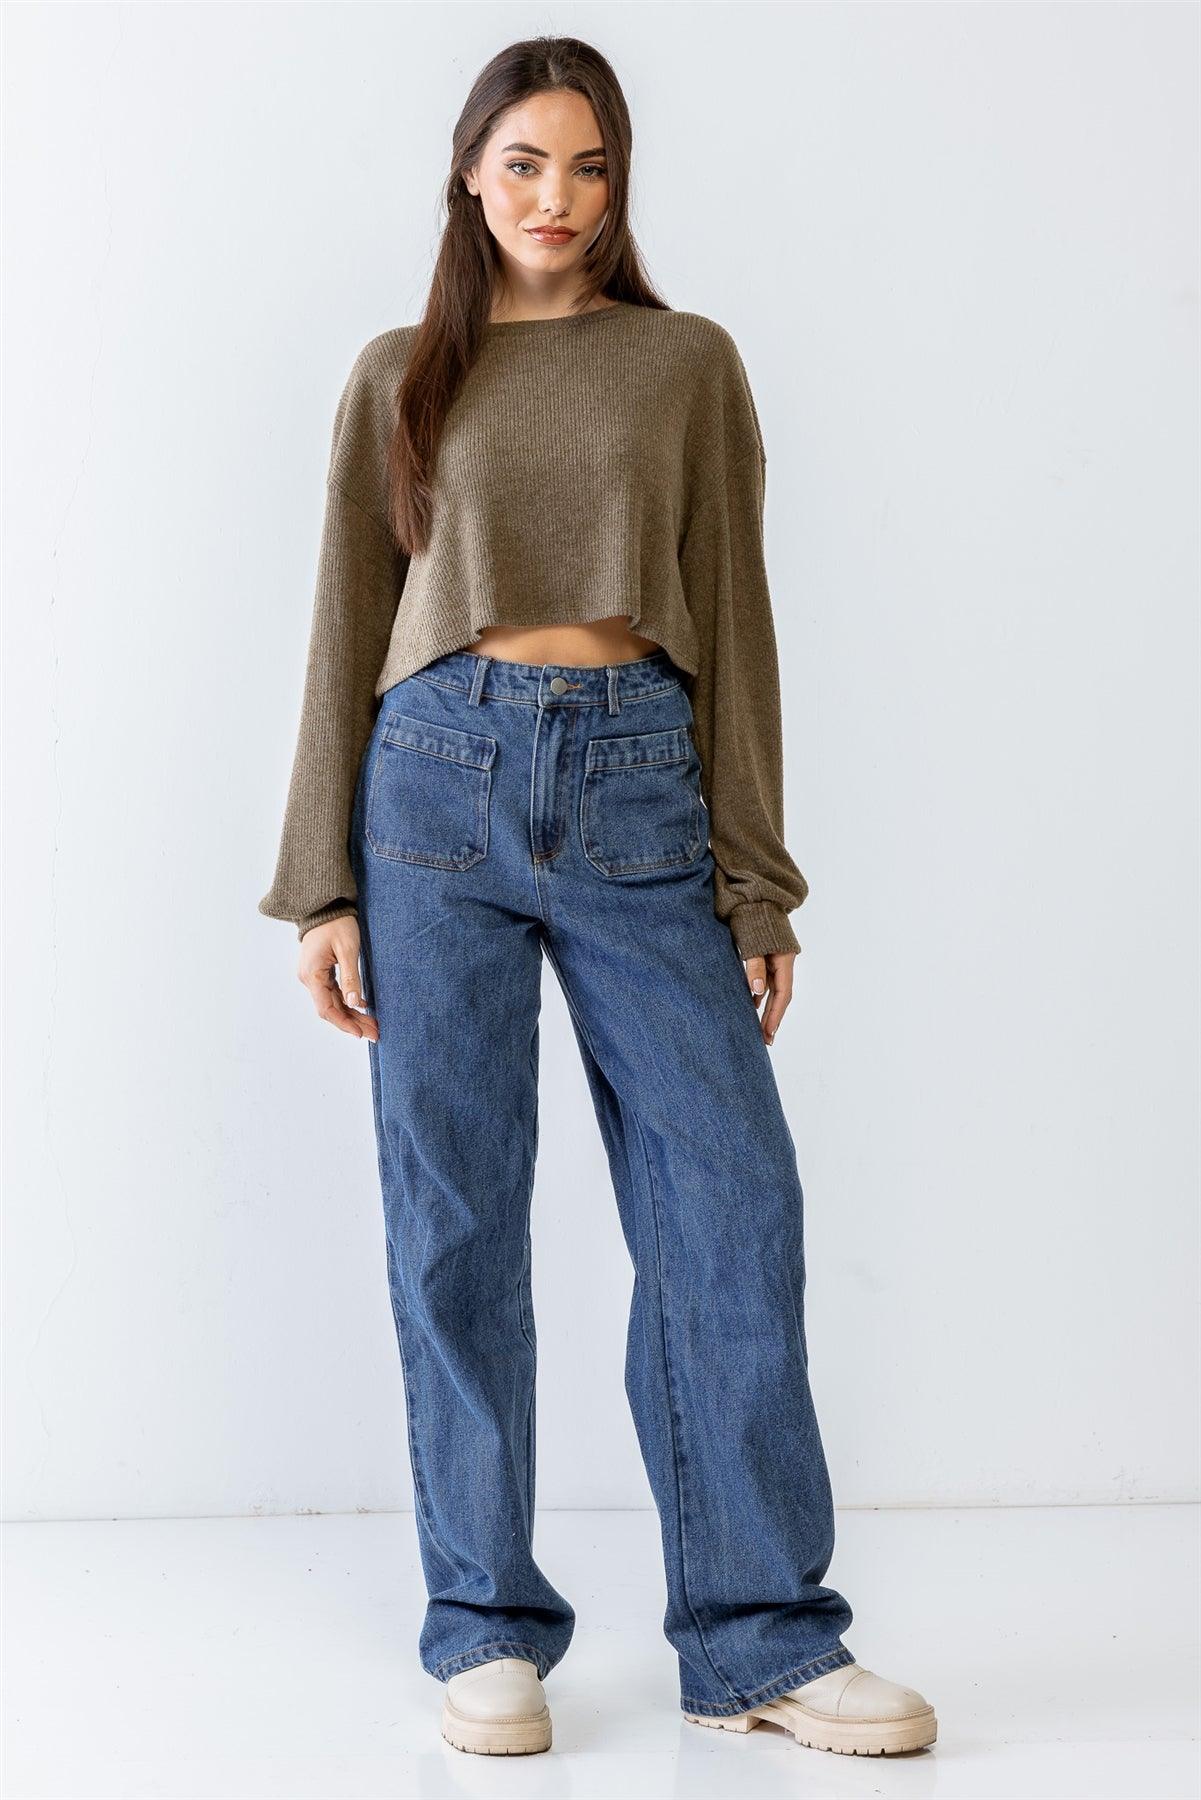 Olive Ribbed Balloon Long Sleeve Crop Sweater /1-2-2-1